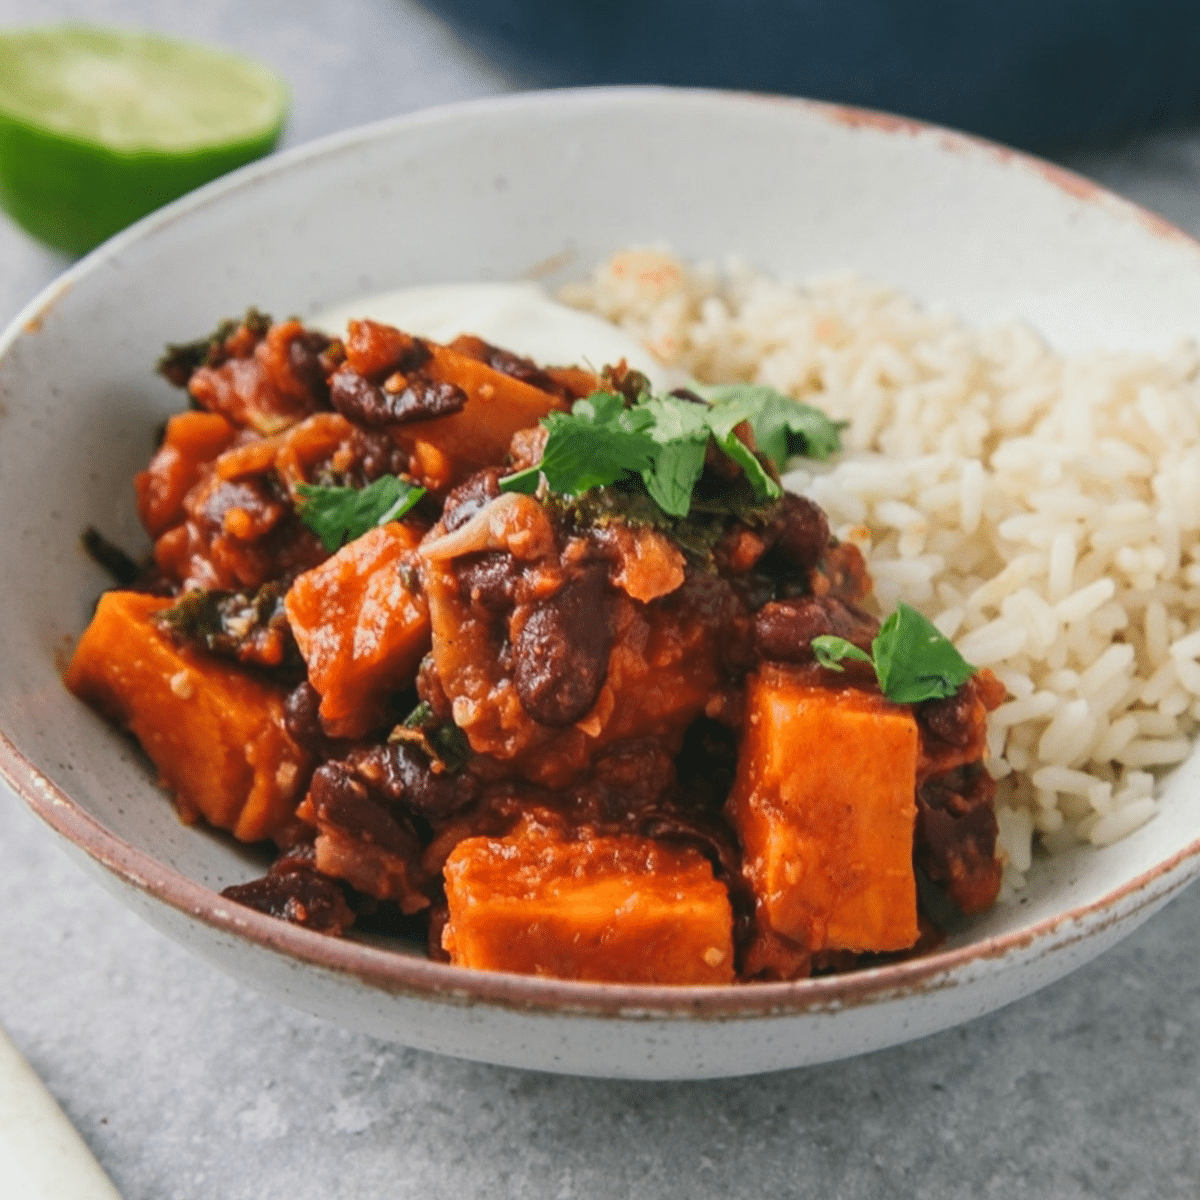 Looking for a delicious, quick, easy, healthy and frugal dinner recipe? This vegan Spicy Bean & Sweet Potato Chilli ticks all those boxes!